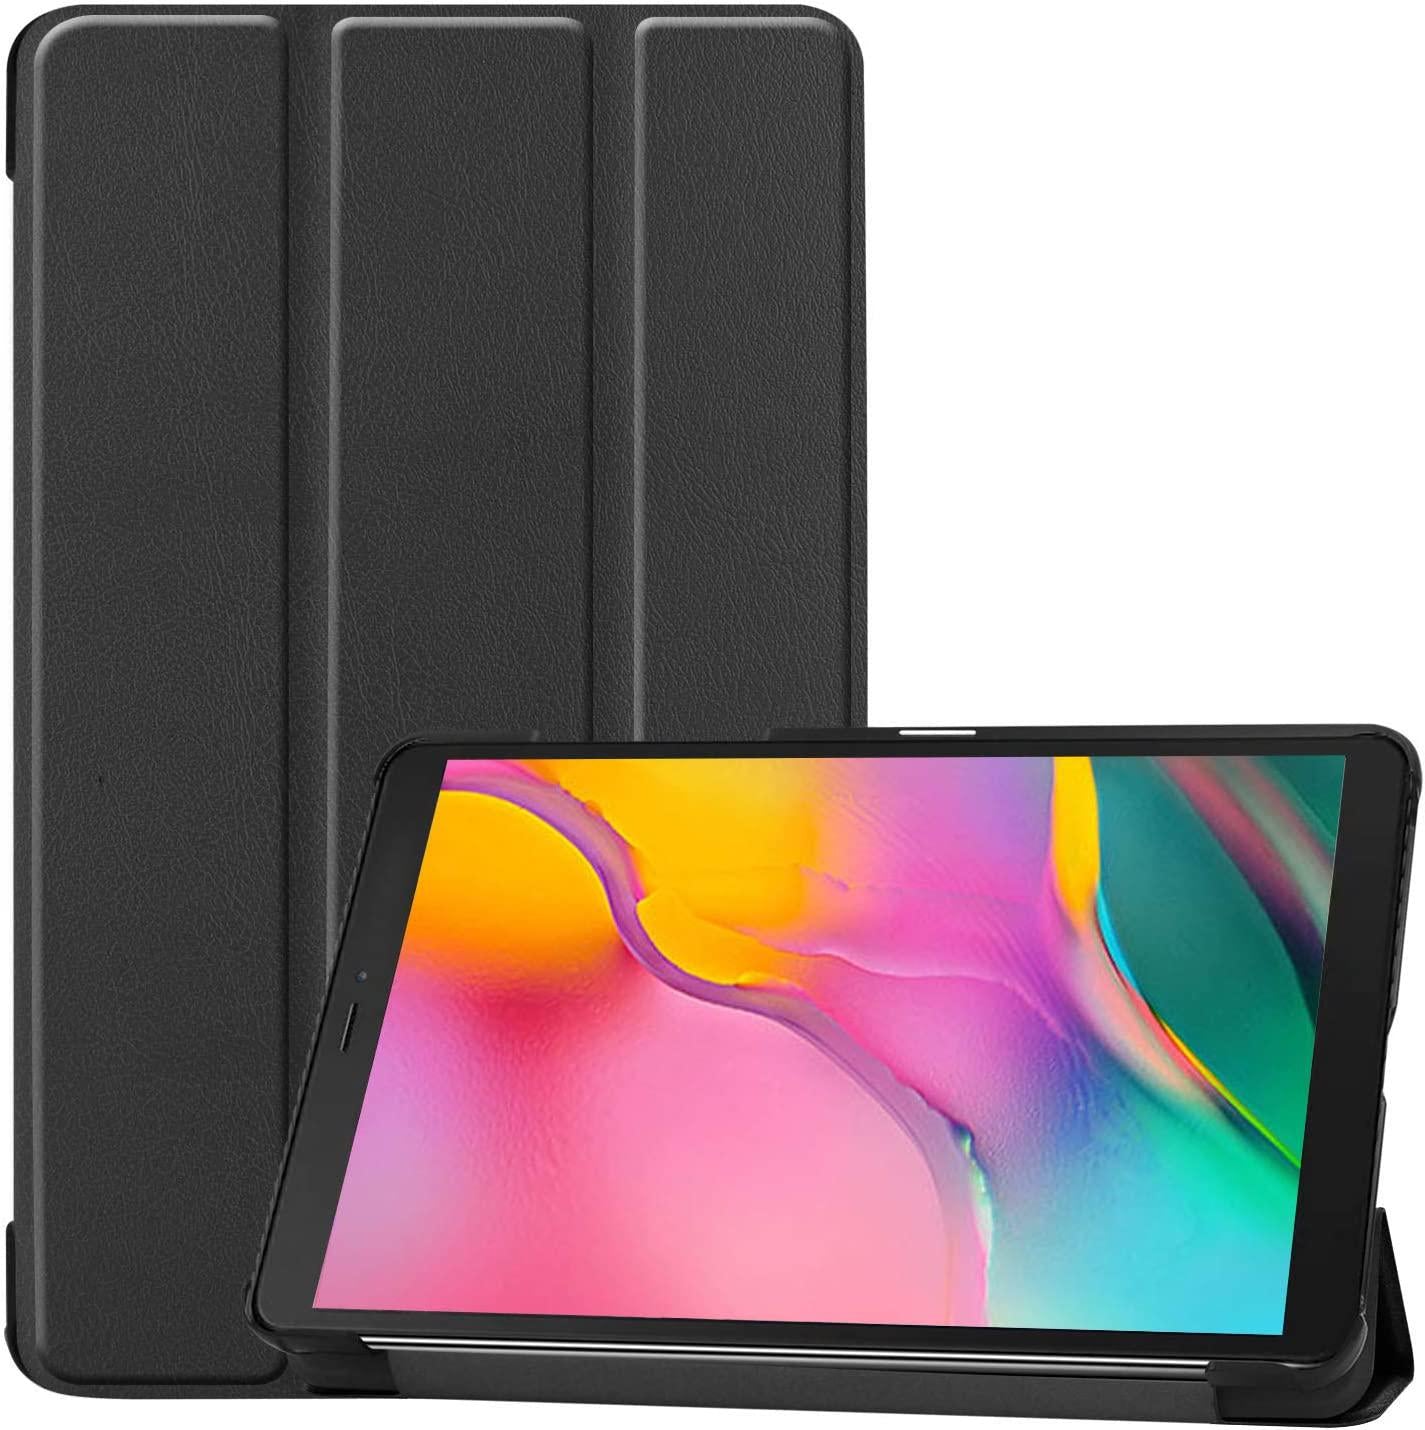 Procase, ProCase Galaxy Tab A 8.0 2019 Case T290 T295, Slim Light Cover Trifold Stand Hard Shell Folio Case for 8.0 inch Galaxy Tab A 2019 Without S Pen Model SM-T290 (Wi-Fi) SM-T295 (LTE) Black